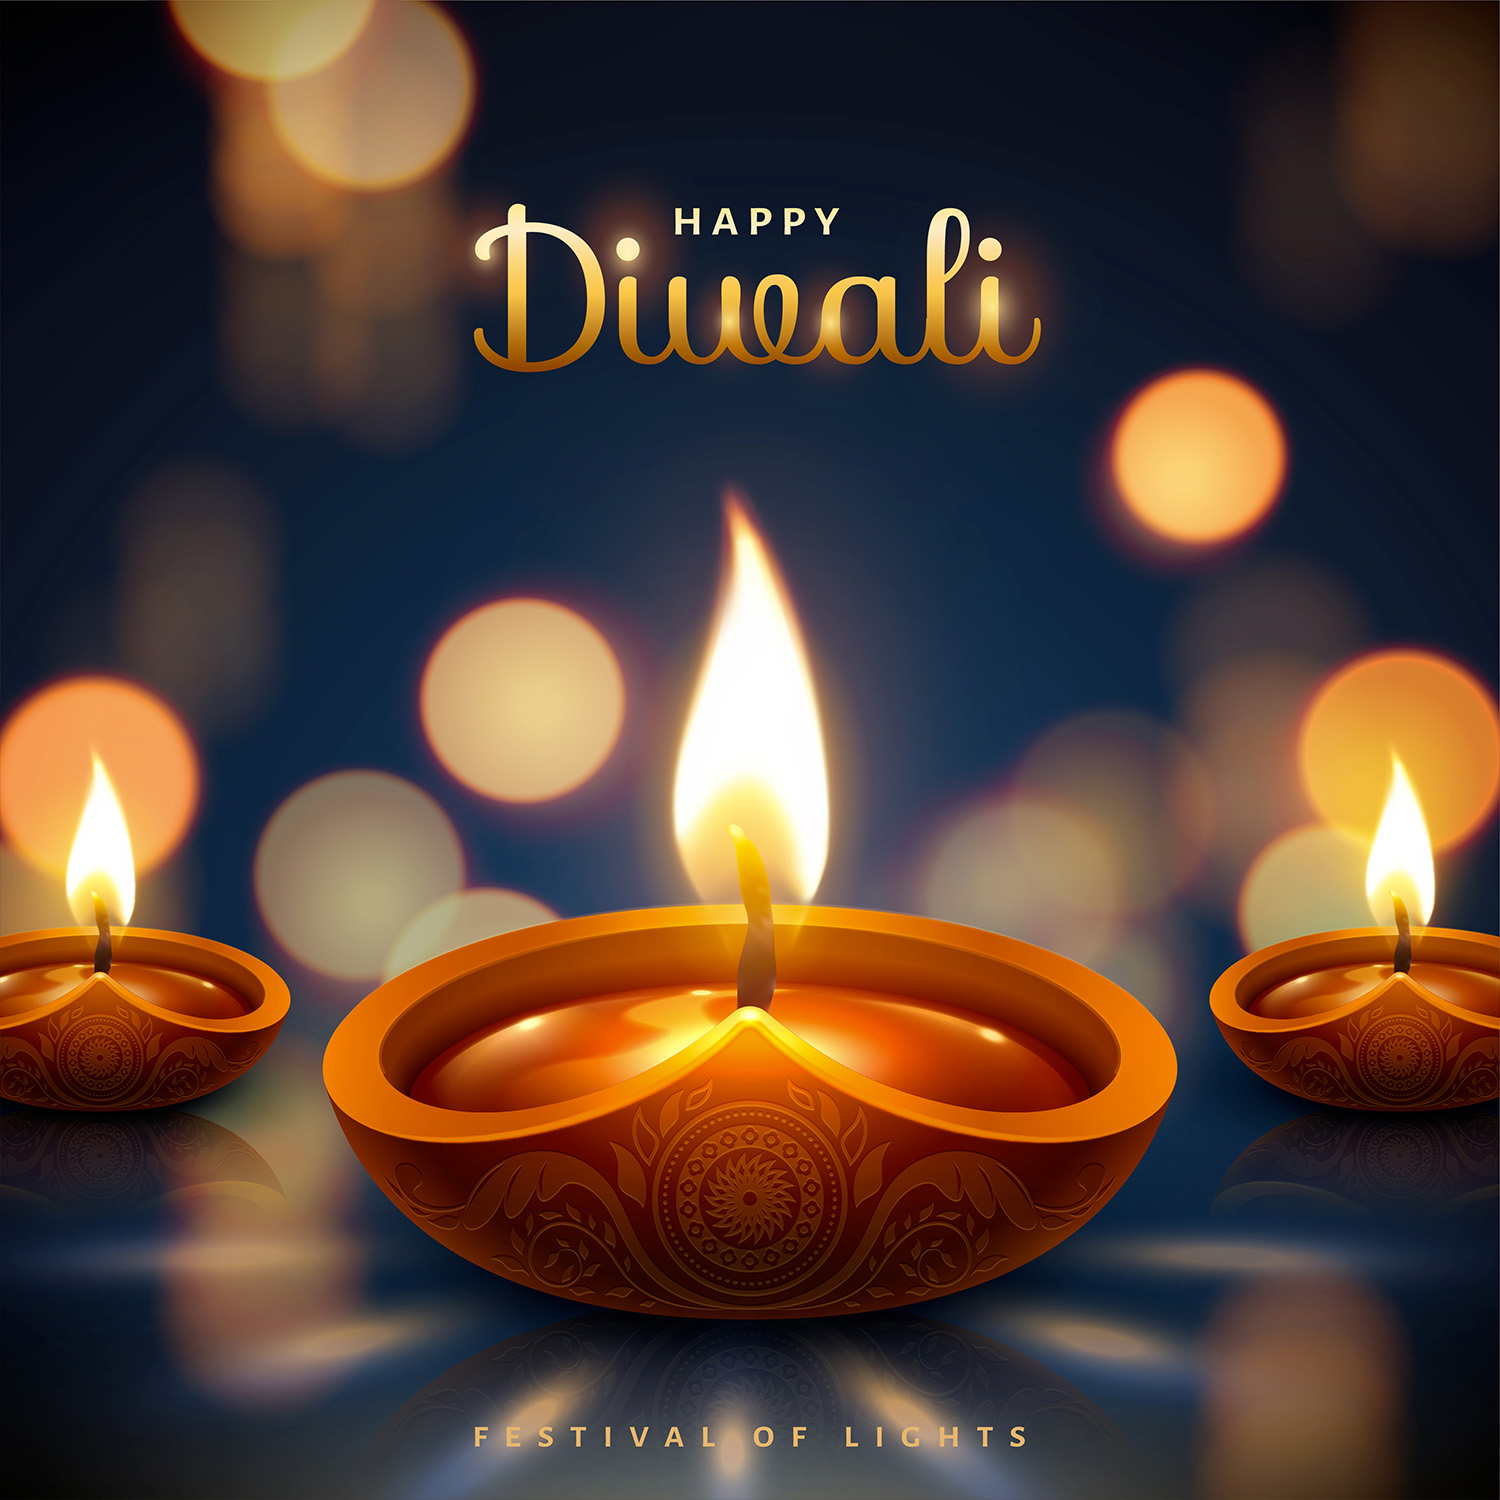 Graphic image of three lighted candles in front of a blue background with Happy Diwali in script above the candles and Festival of Lights in small text below the front candle.